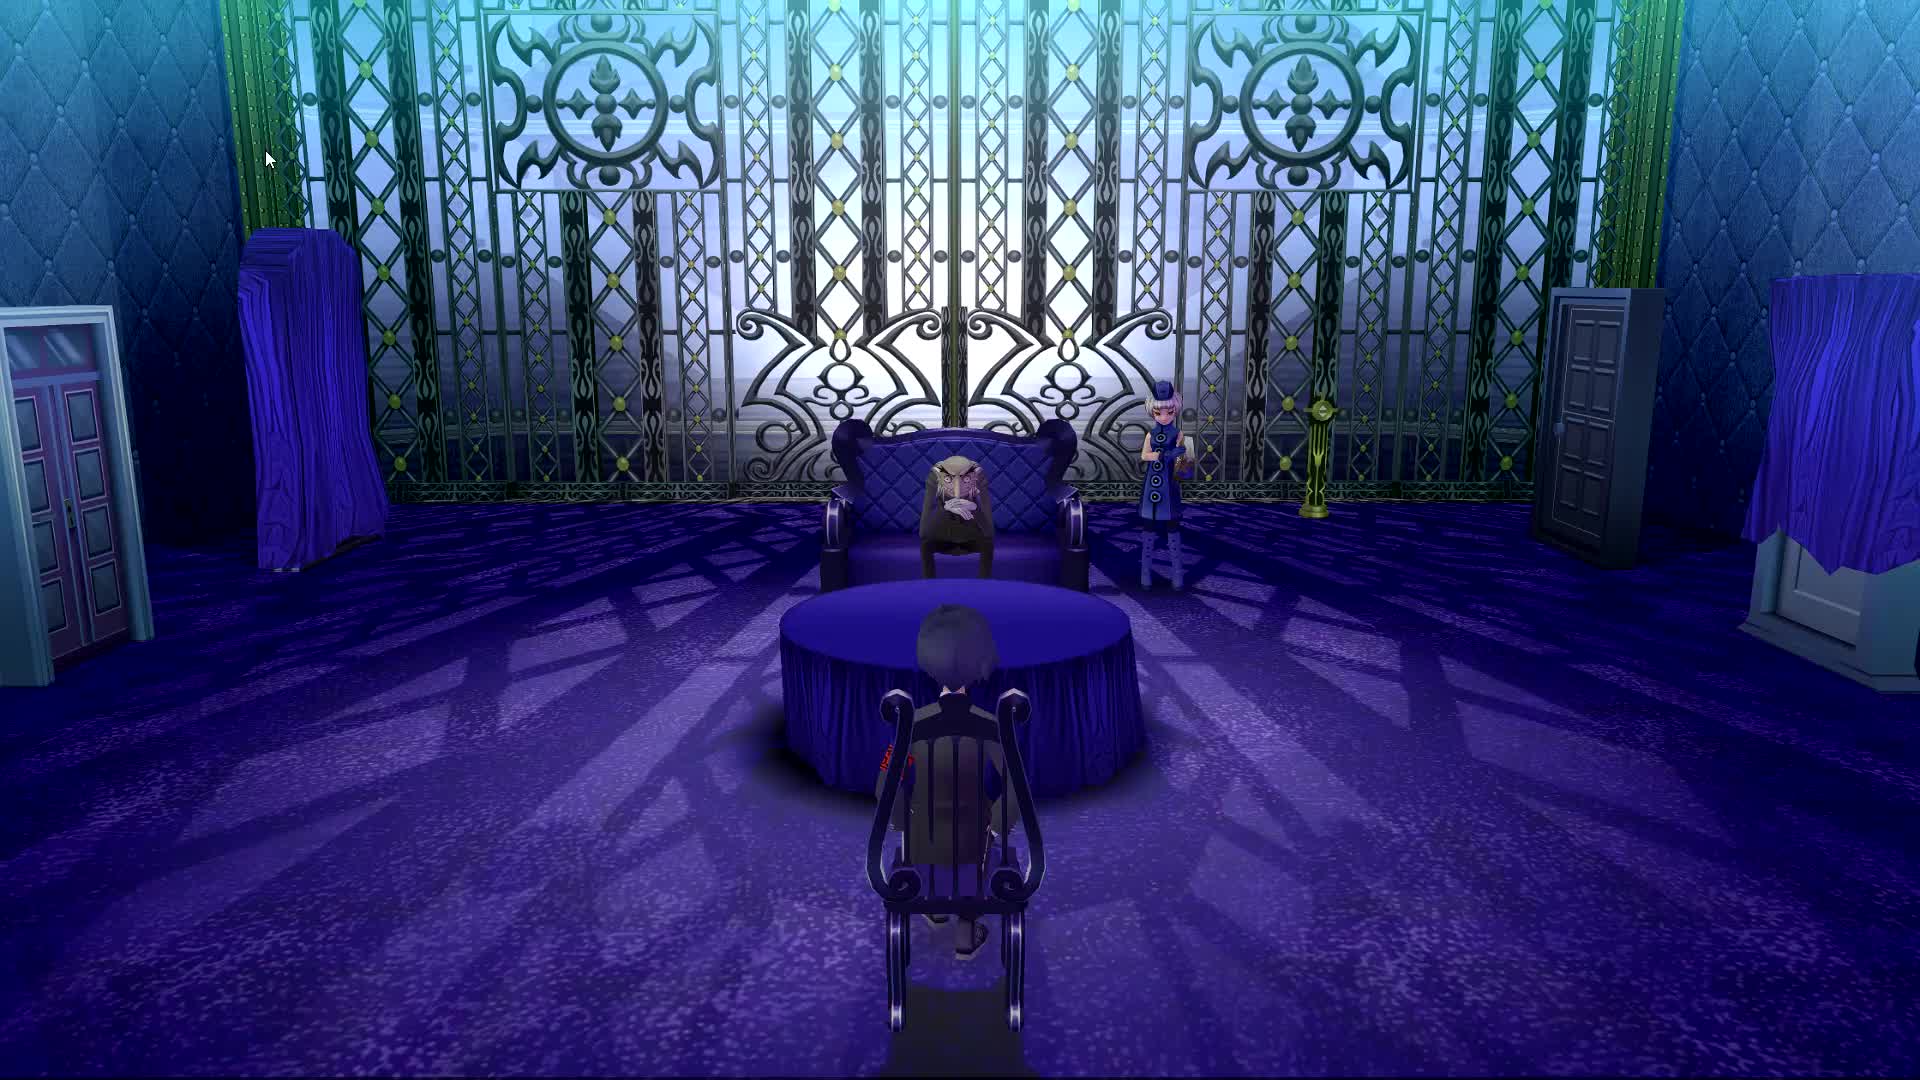 The Velvet Room as it appears in-game. The grating at the back was a particular influence on our stationary and for the second tier of our wedding cake!